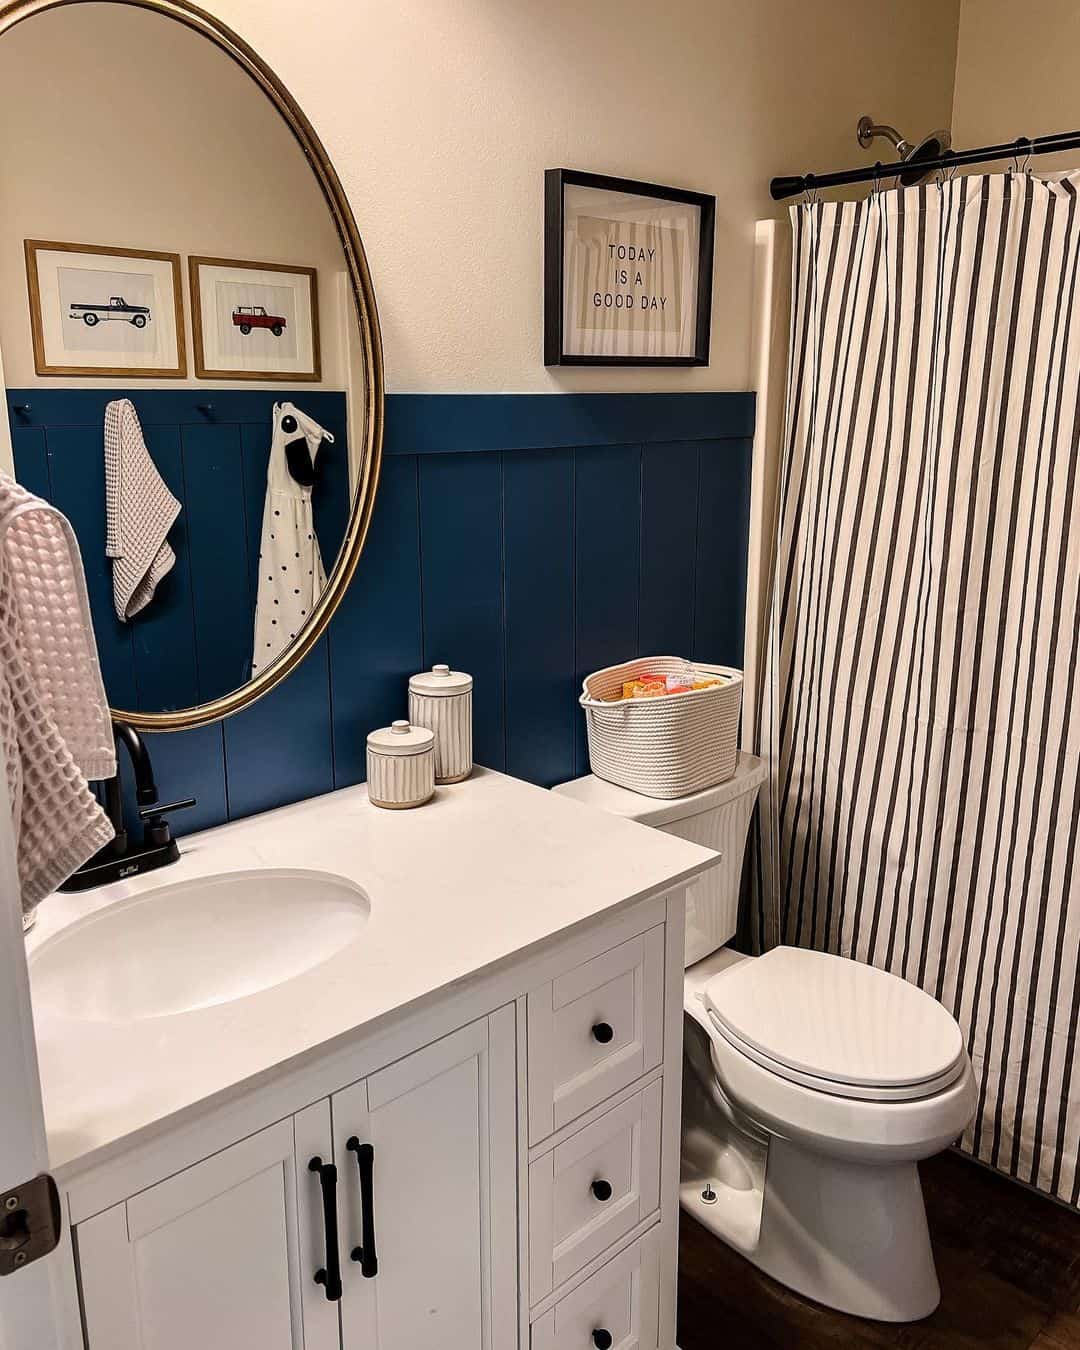 16 Boys Bathroom Ideas That They’ll Love Growing Up With